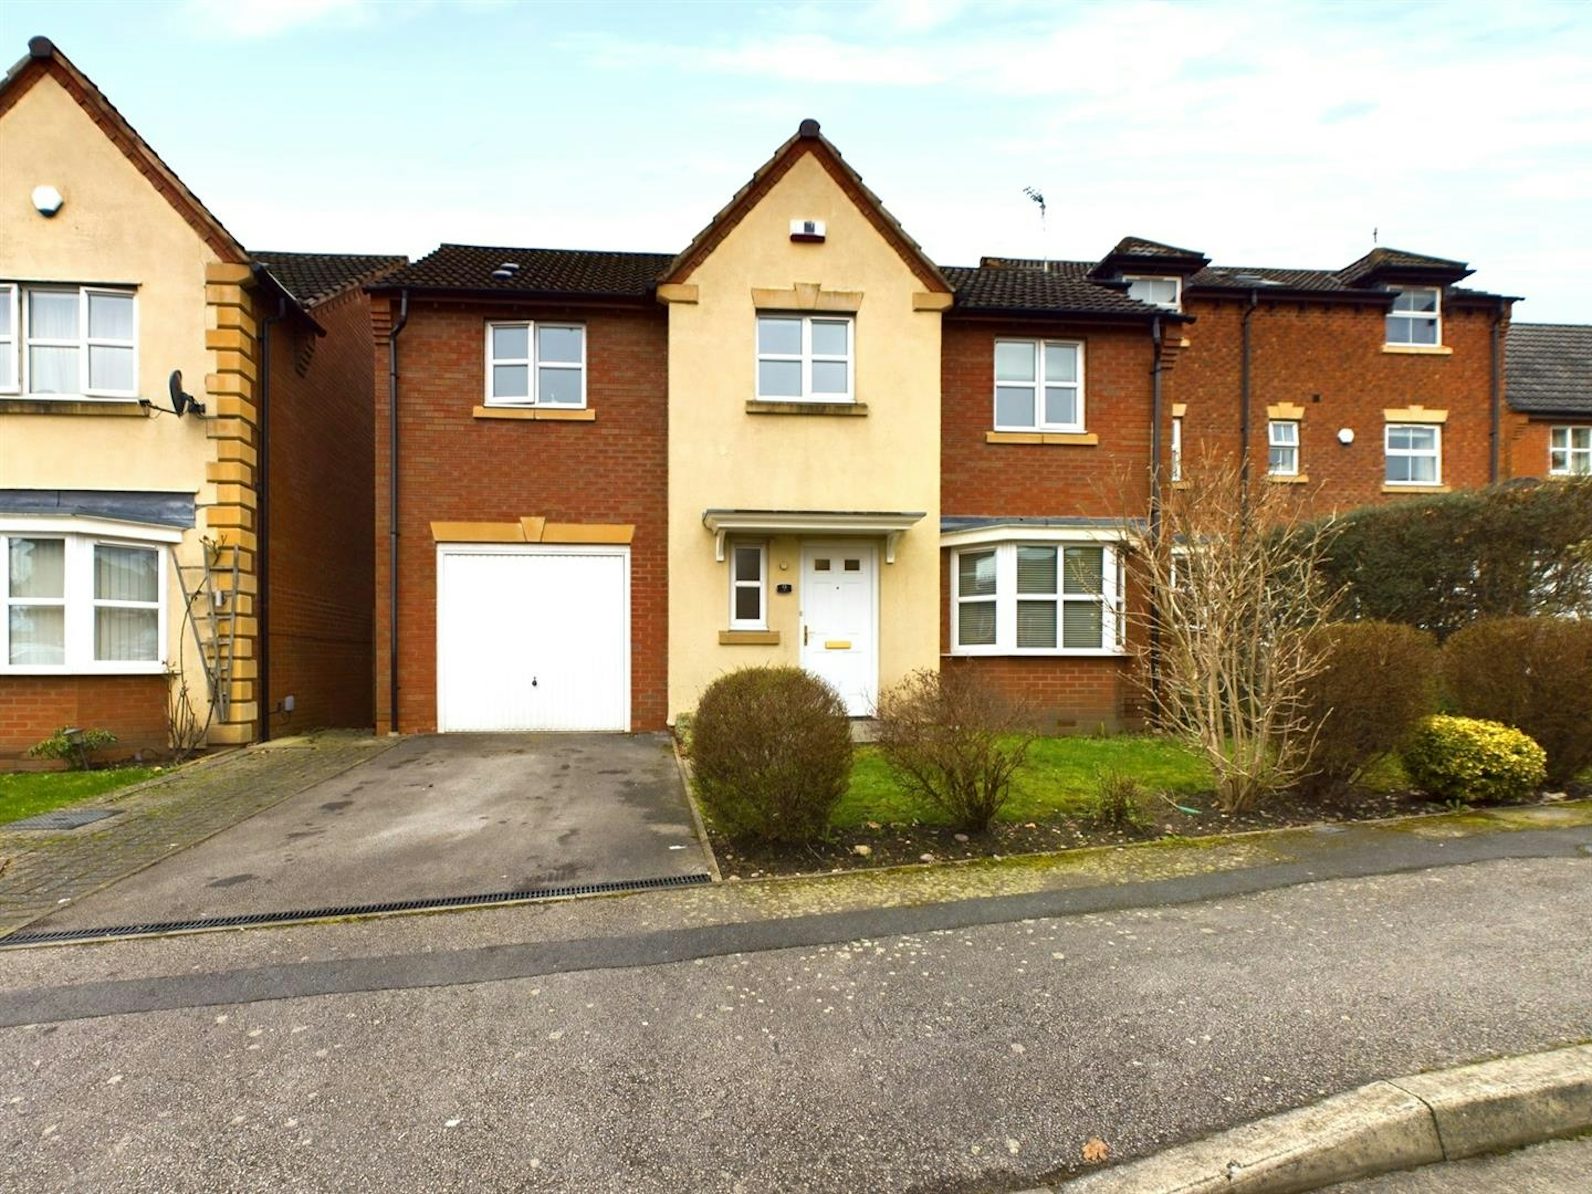 Detached house for sale on Tom Blower Close Nottingham, NG8